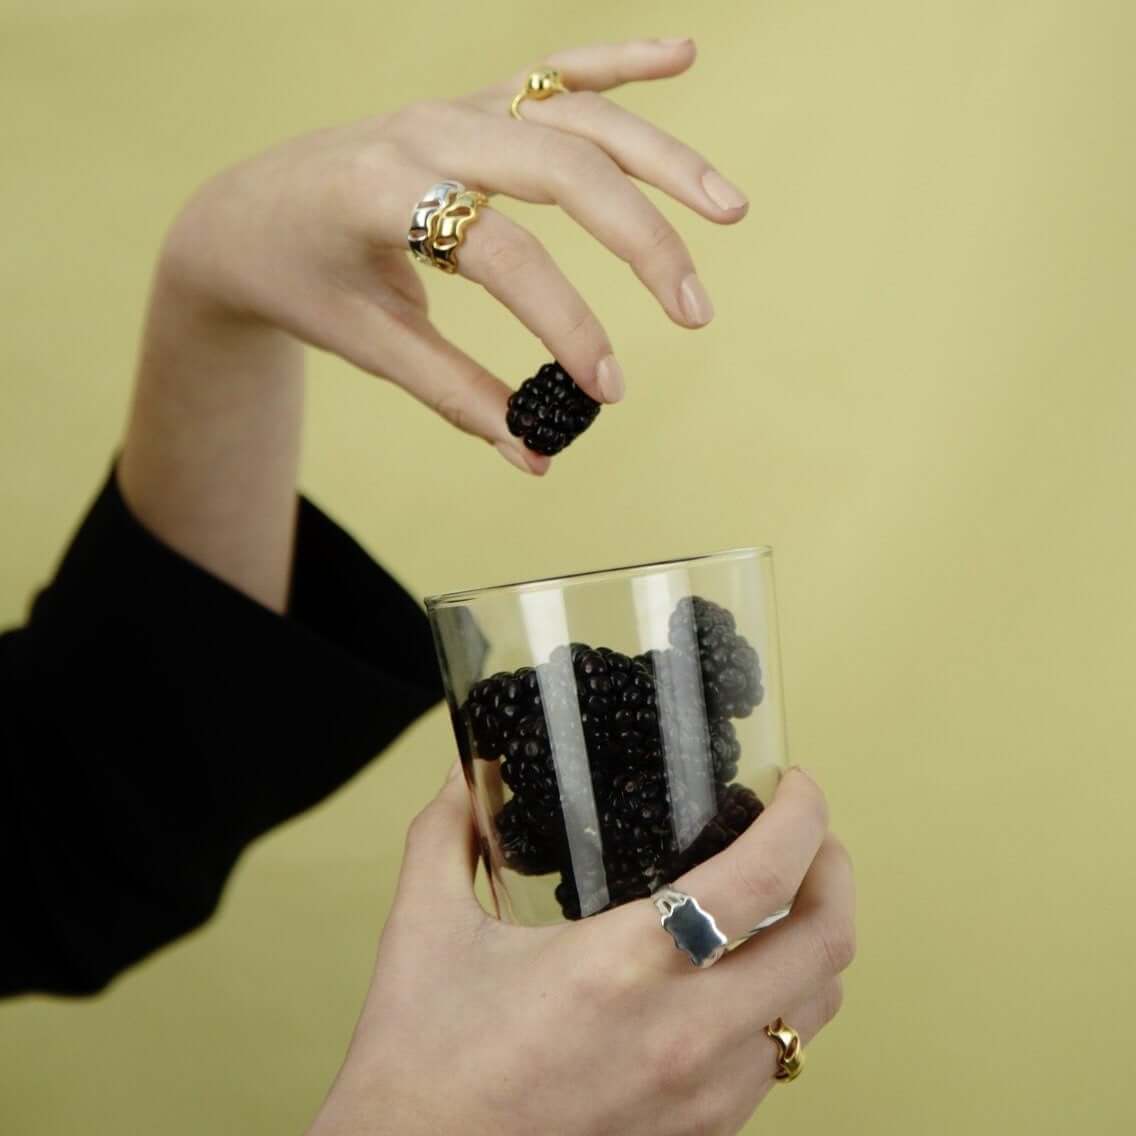 Close up of female hands with rings, dropping a blackberry in a glass filled with blackberries